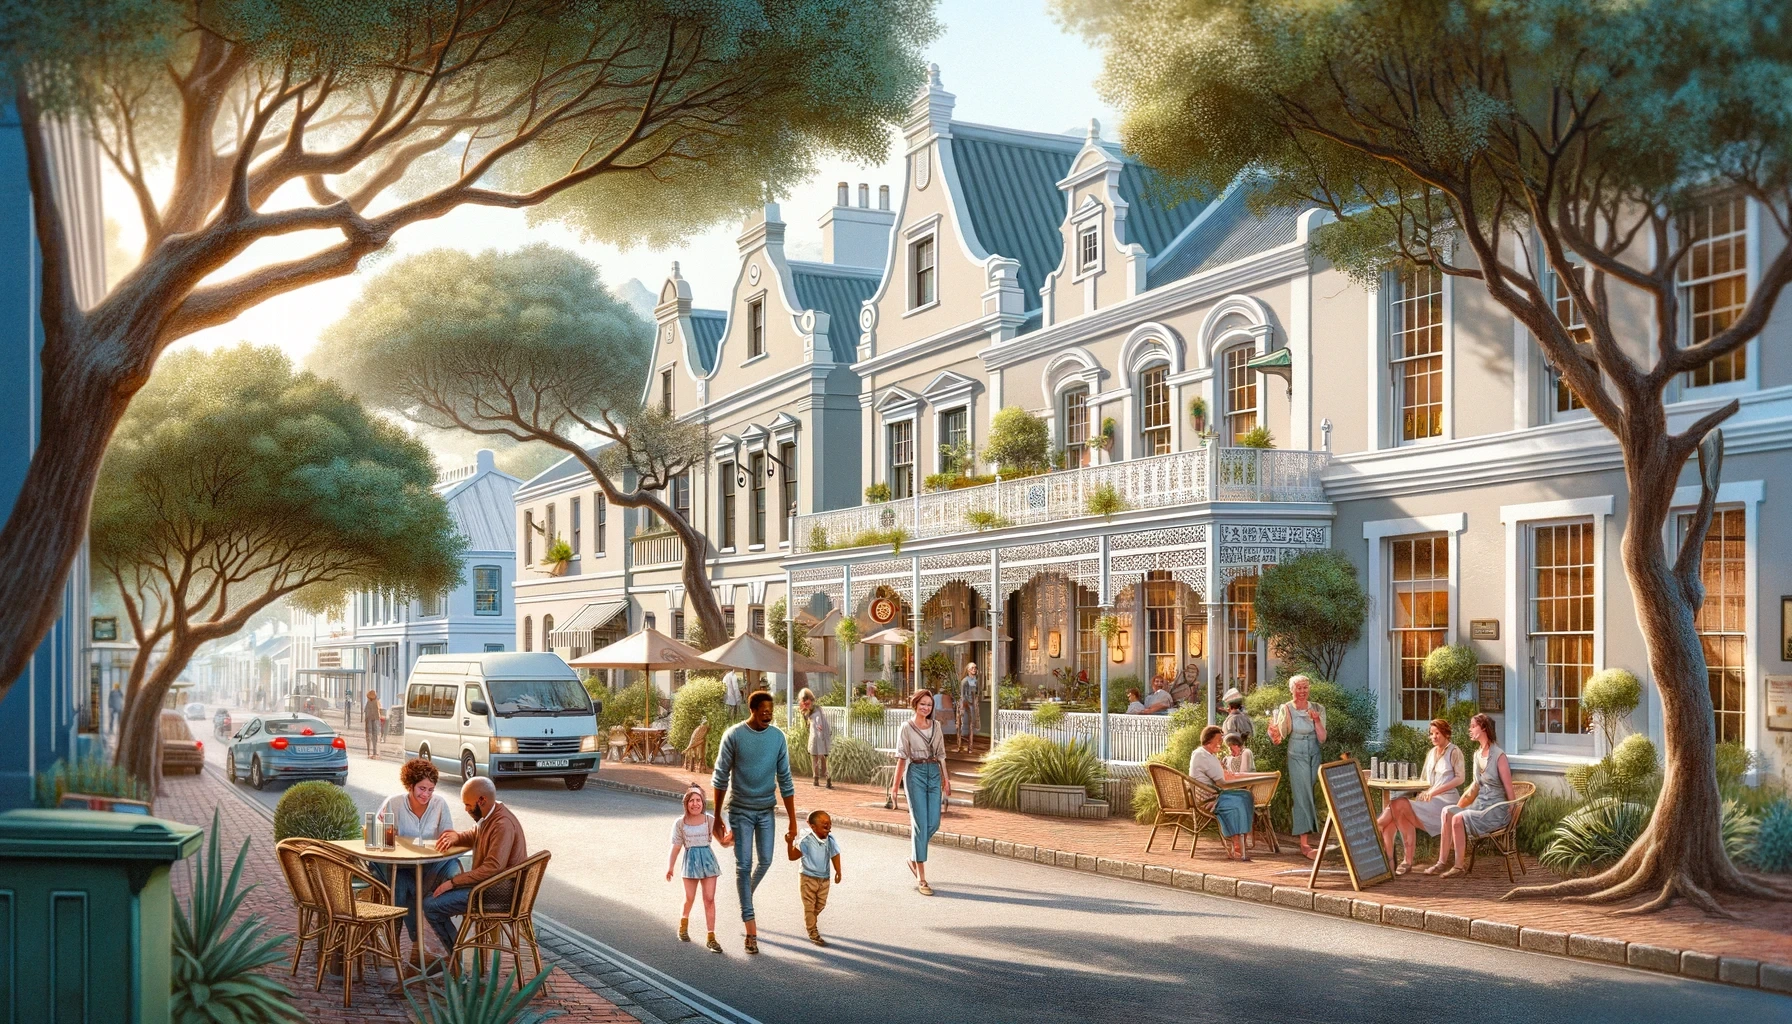 A charming and historic image of Wynberg in Cape Town